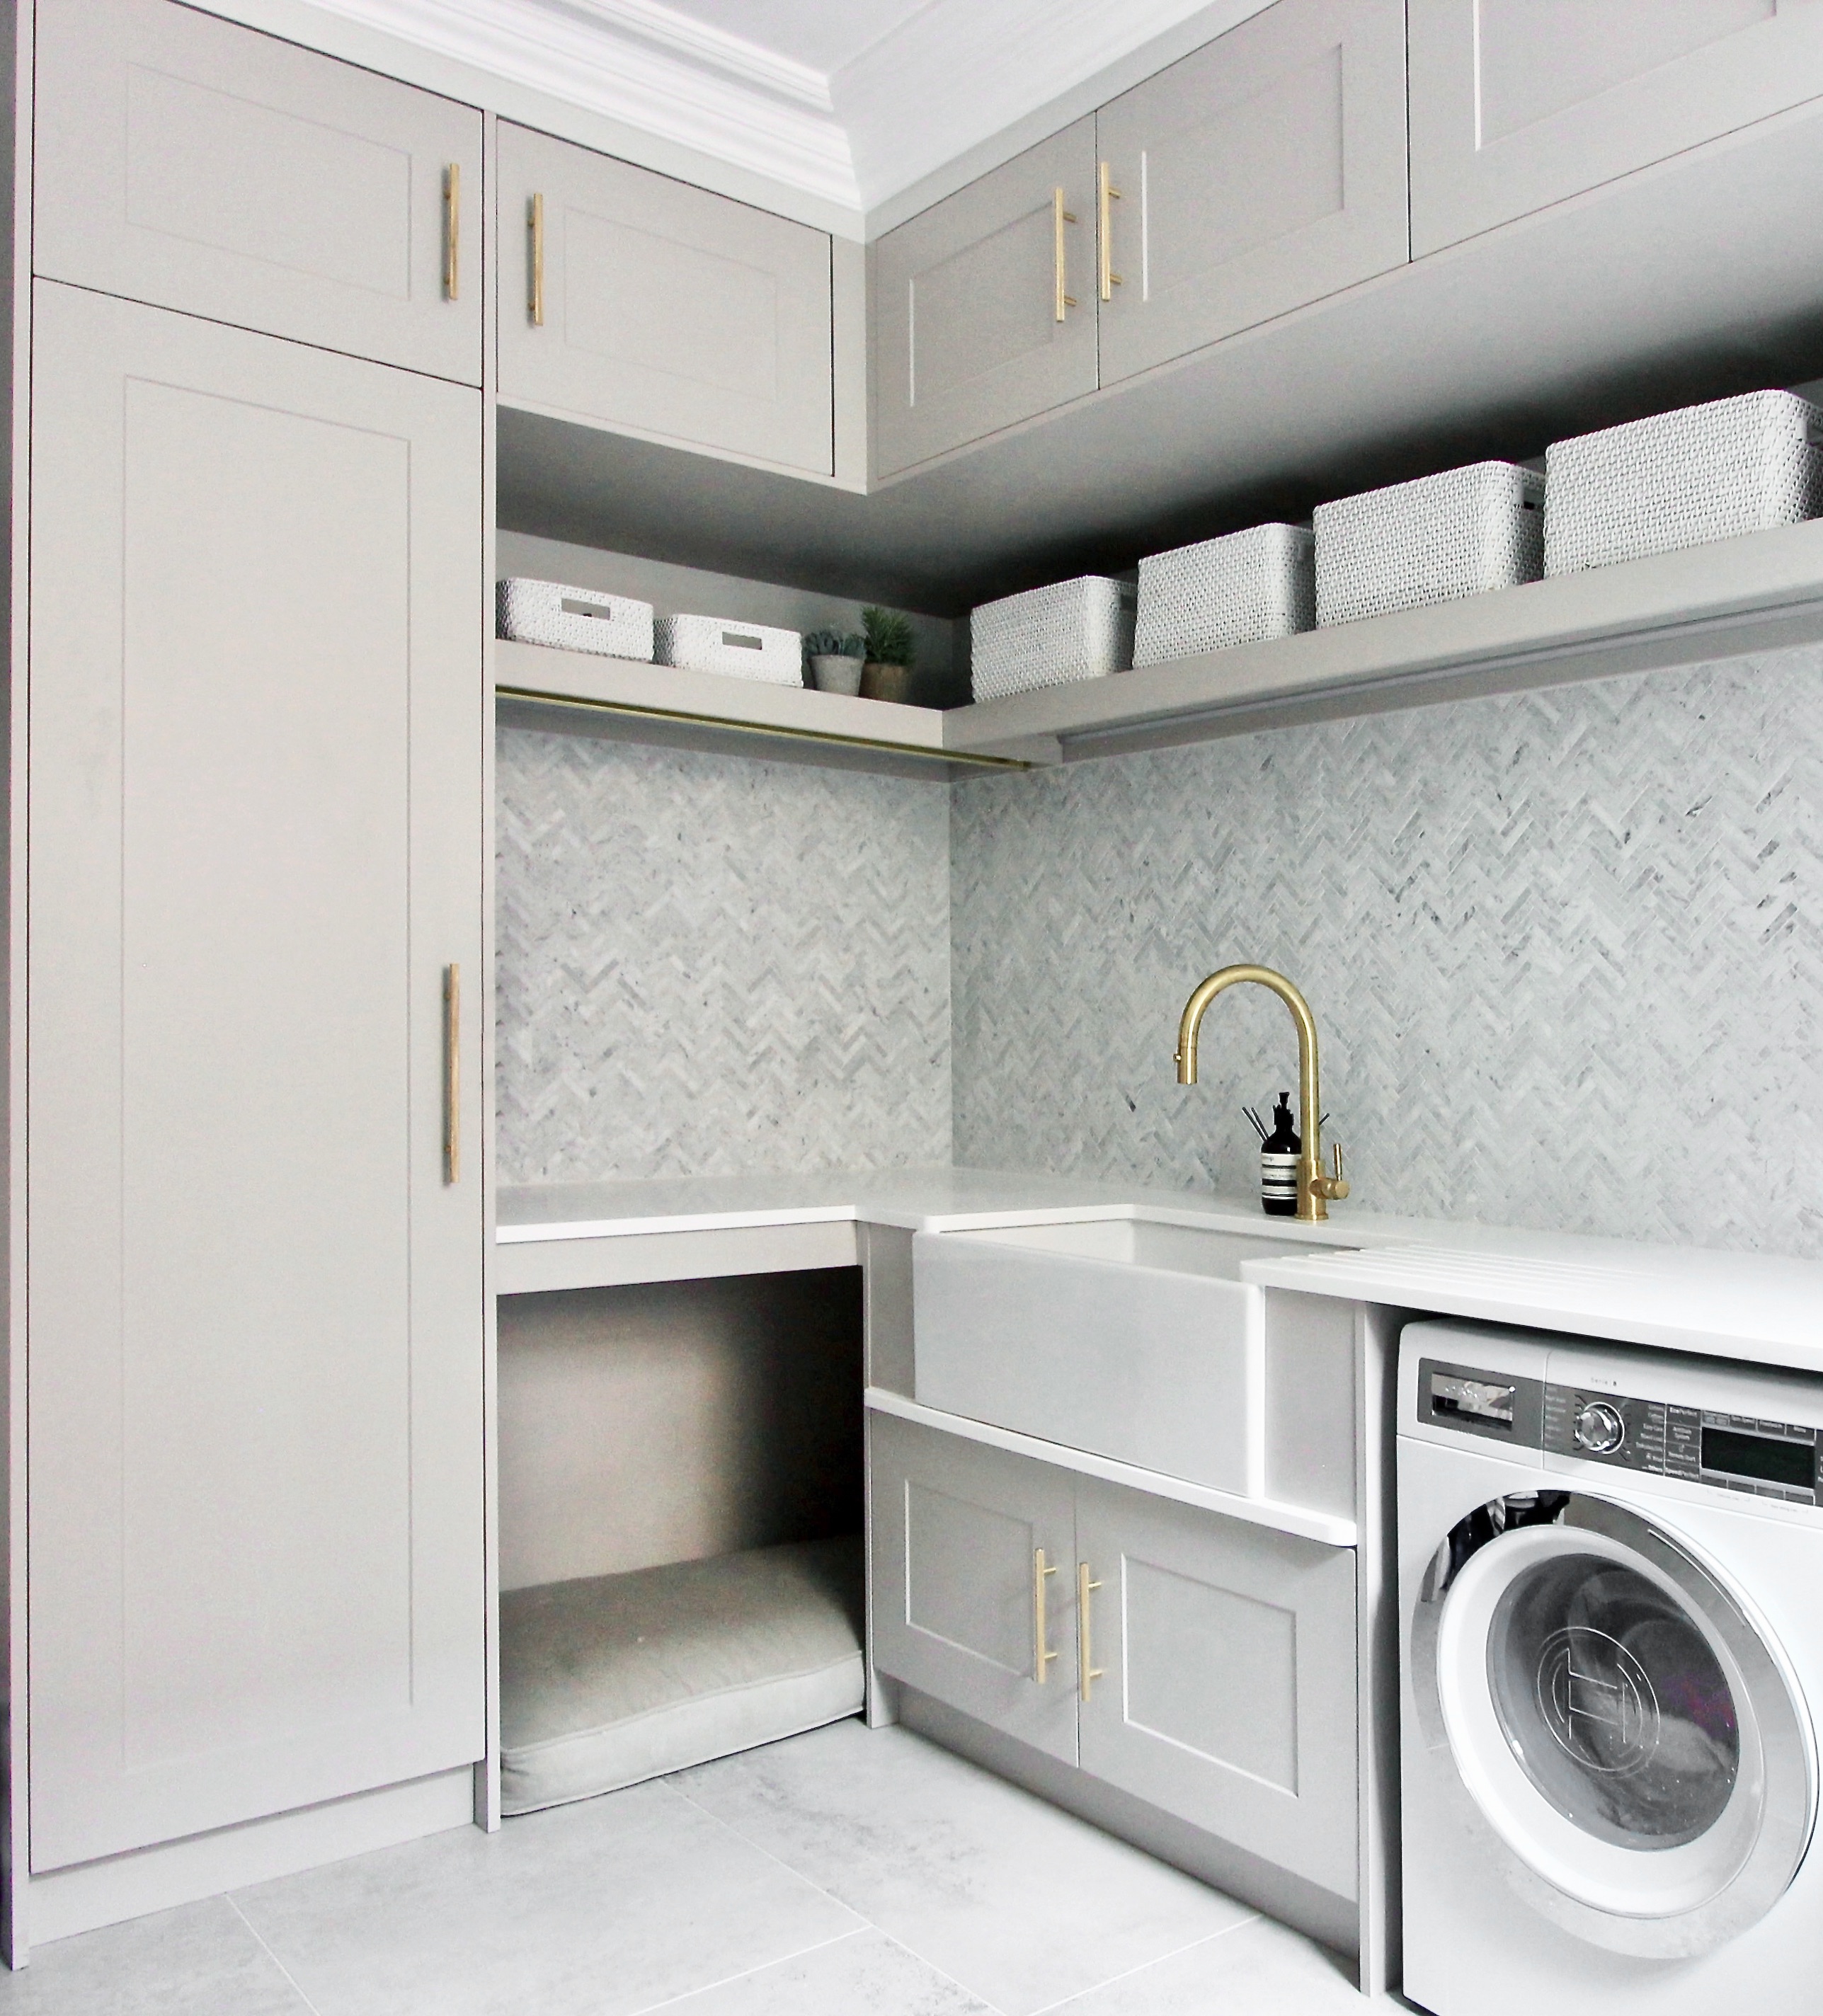 An elegant practical light grey utility room with brass handles